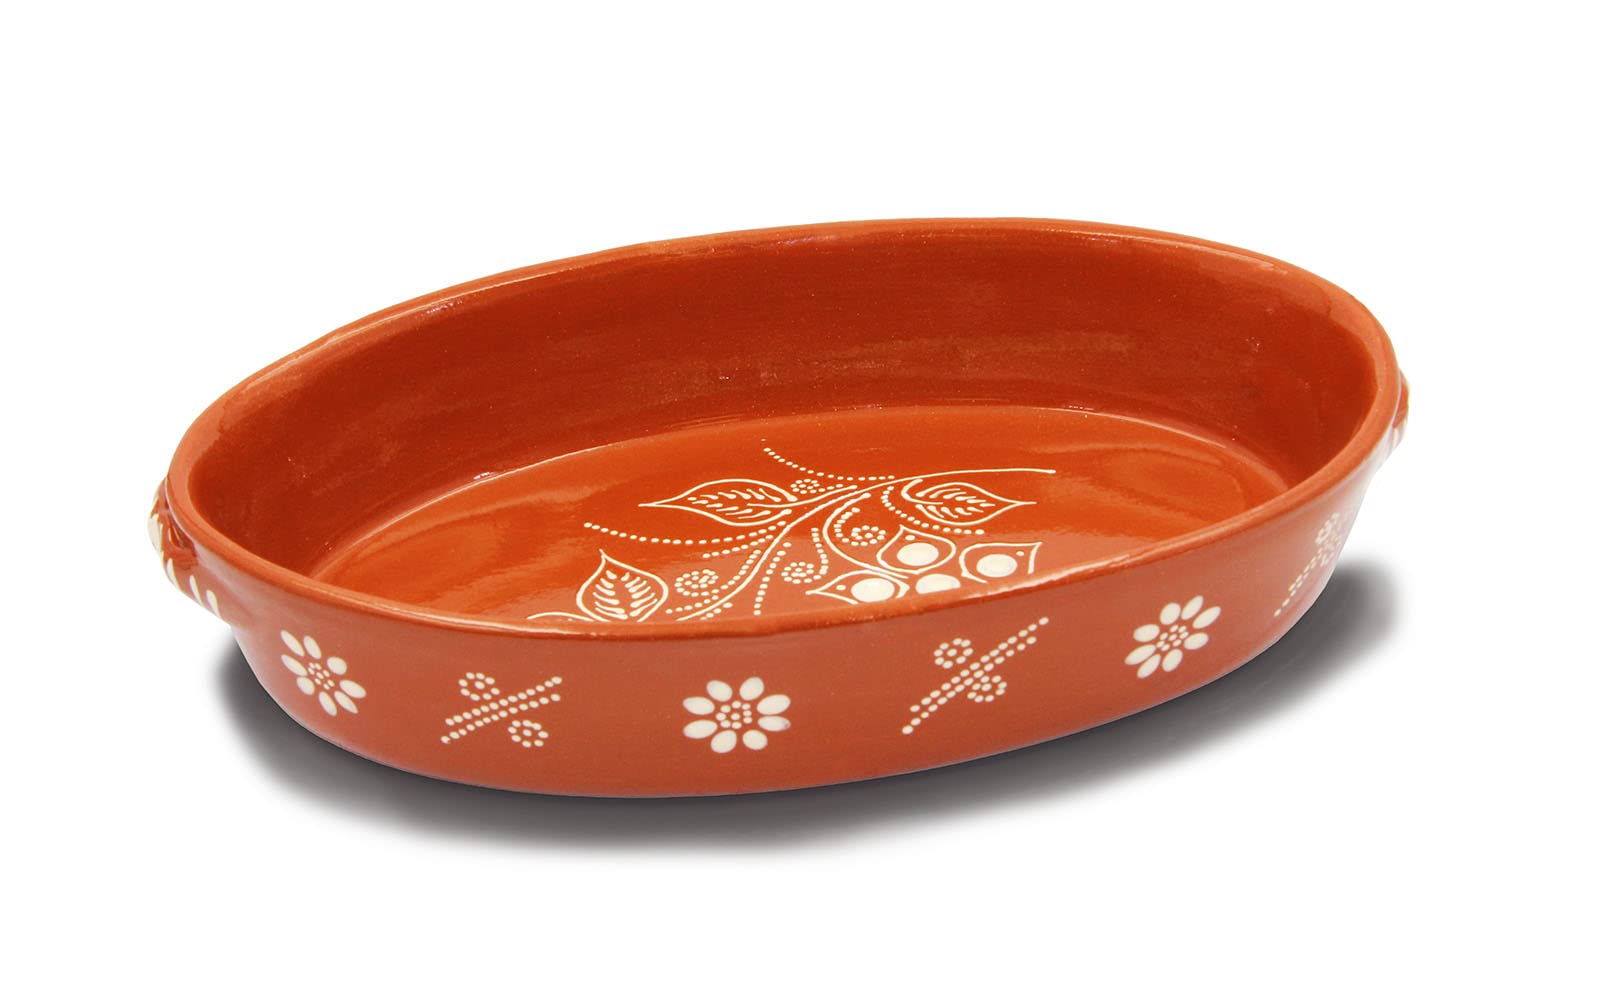 Vintage Portuguese Traditional Clay Terracotta Pottery Oval Casserole Made In Portugal (N.1 12 1/4 x 8 x 2 5/8